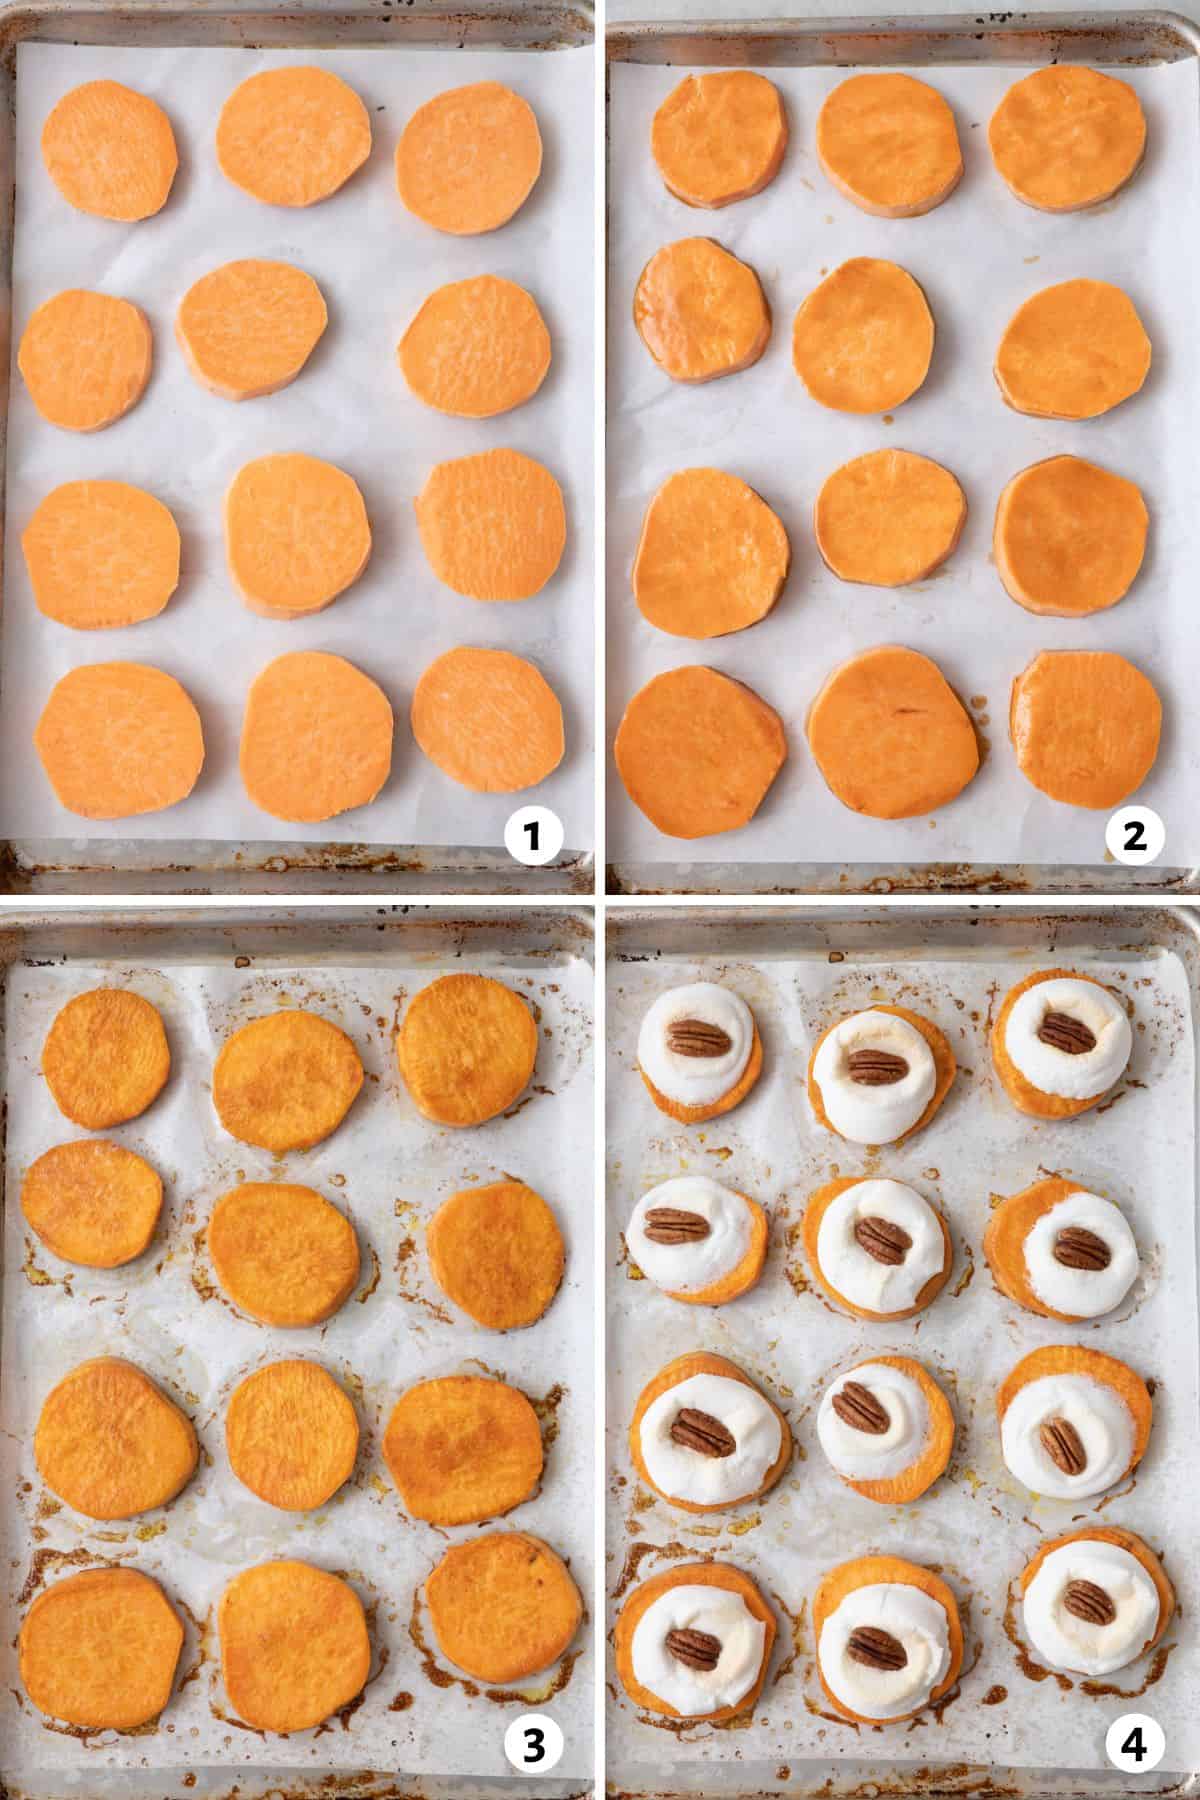 4 image collage of sweet potato rounds on a parchment lined baking sheet after sliced, adding butter, roasting, and then topped with marshmellow and pecan halves.